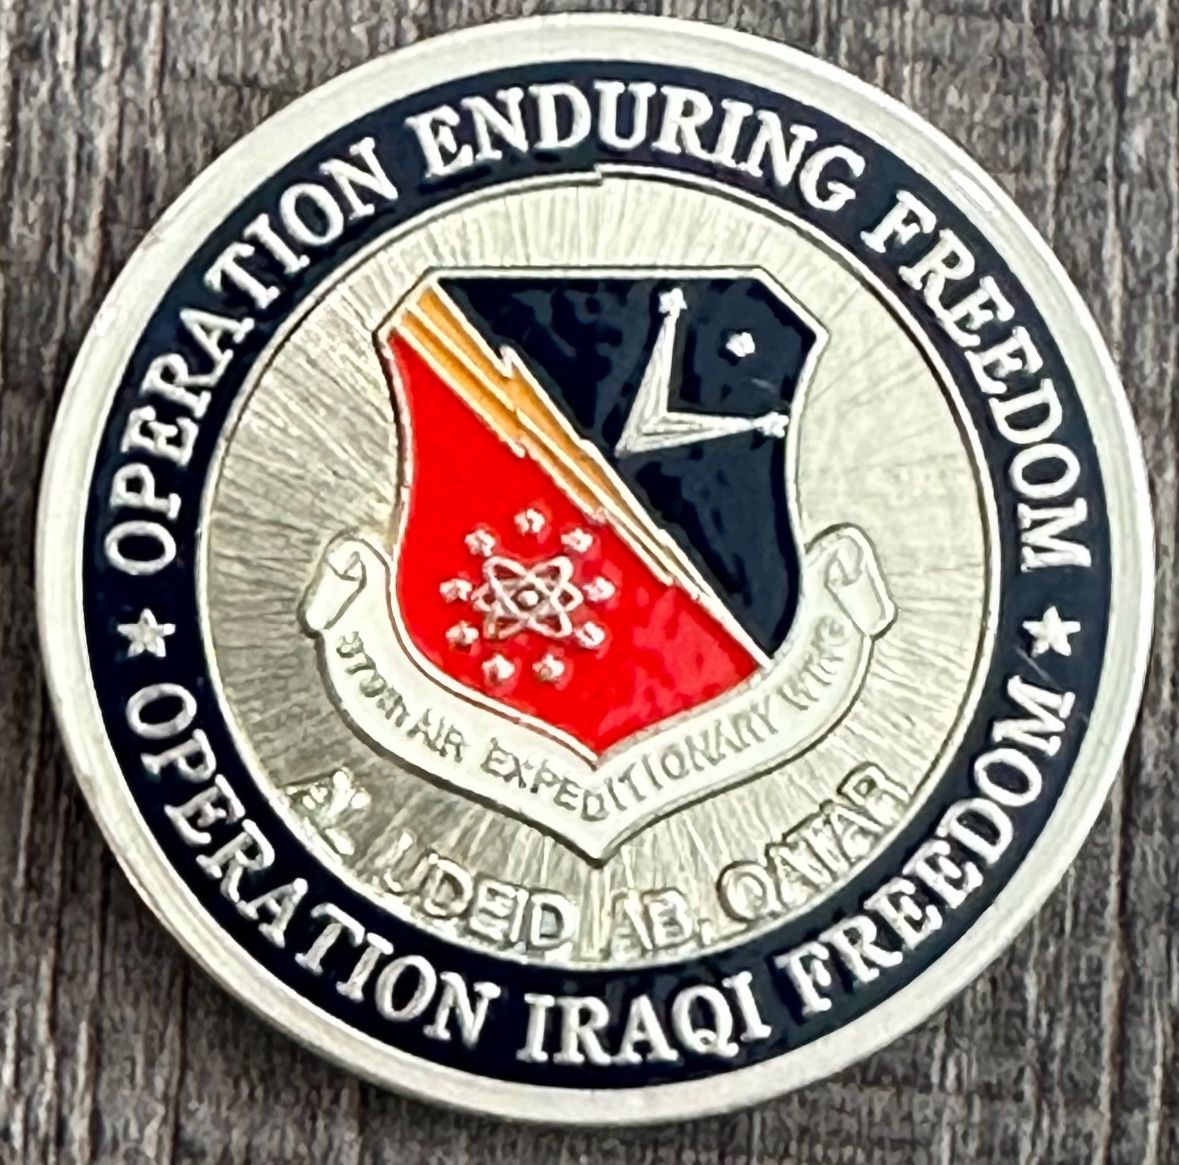 Operation Enduring Freedom & Iraqi Freedom PERSCO Military Challenge Coin